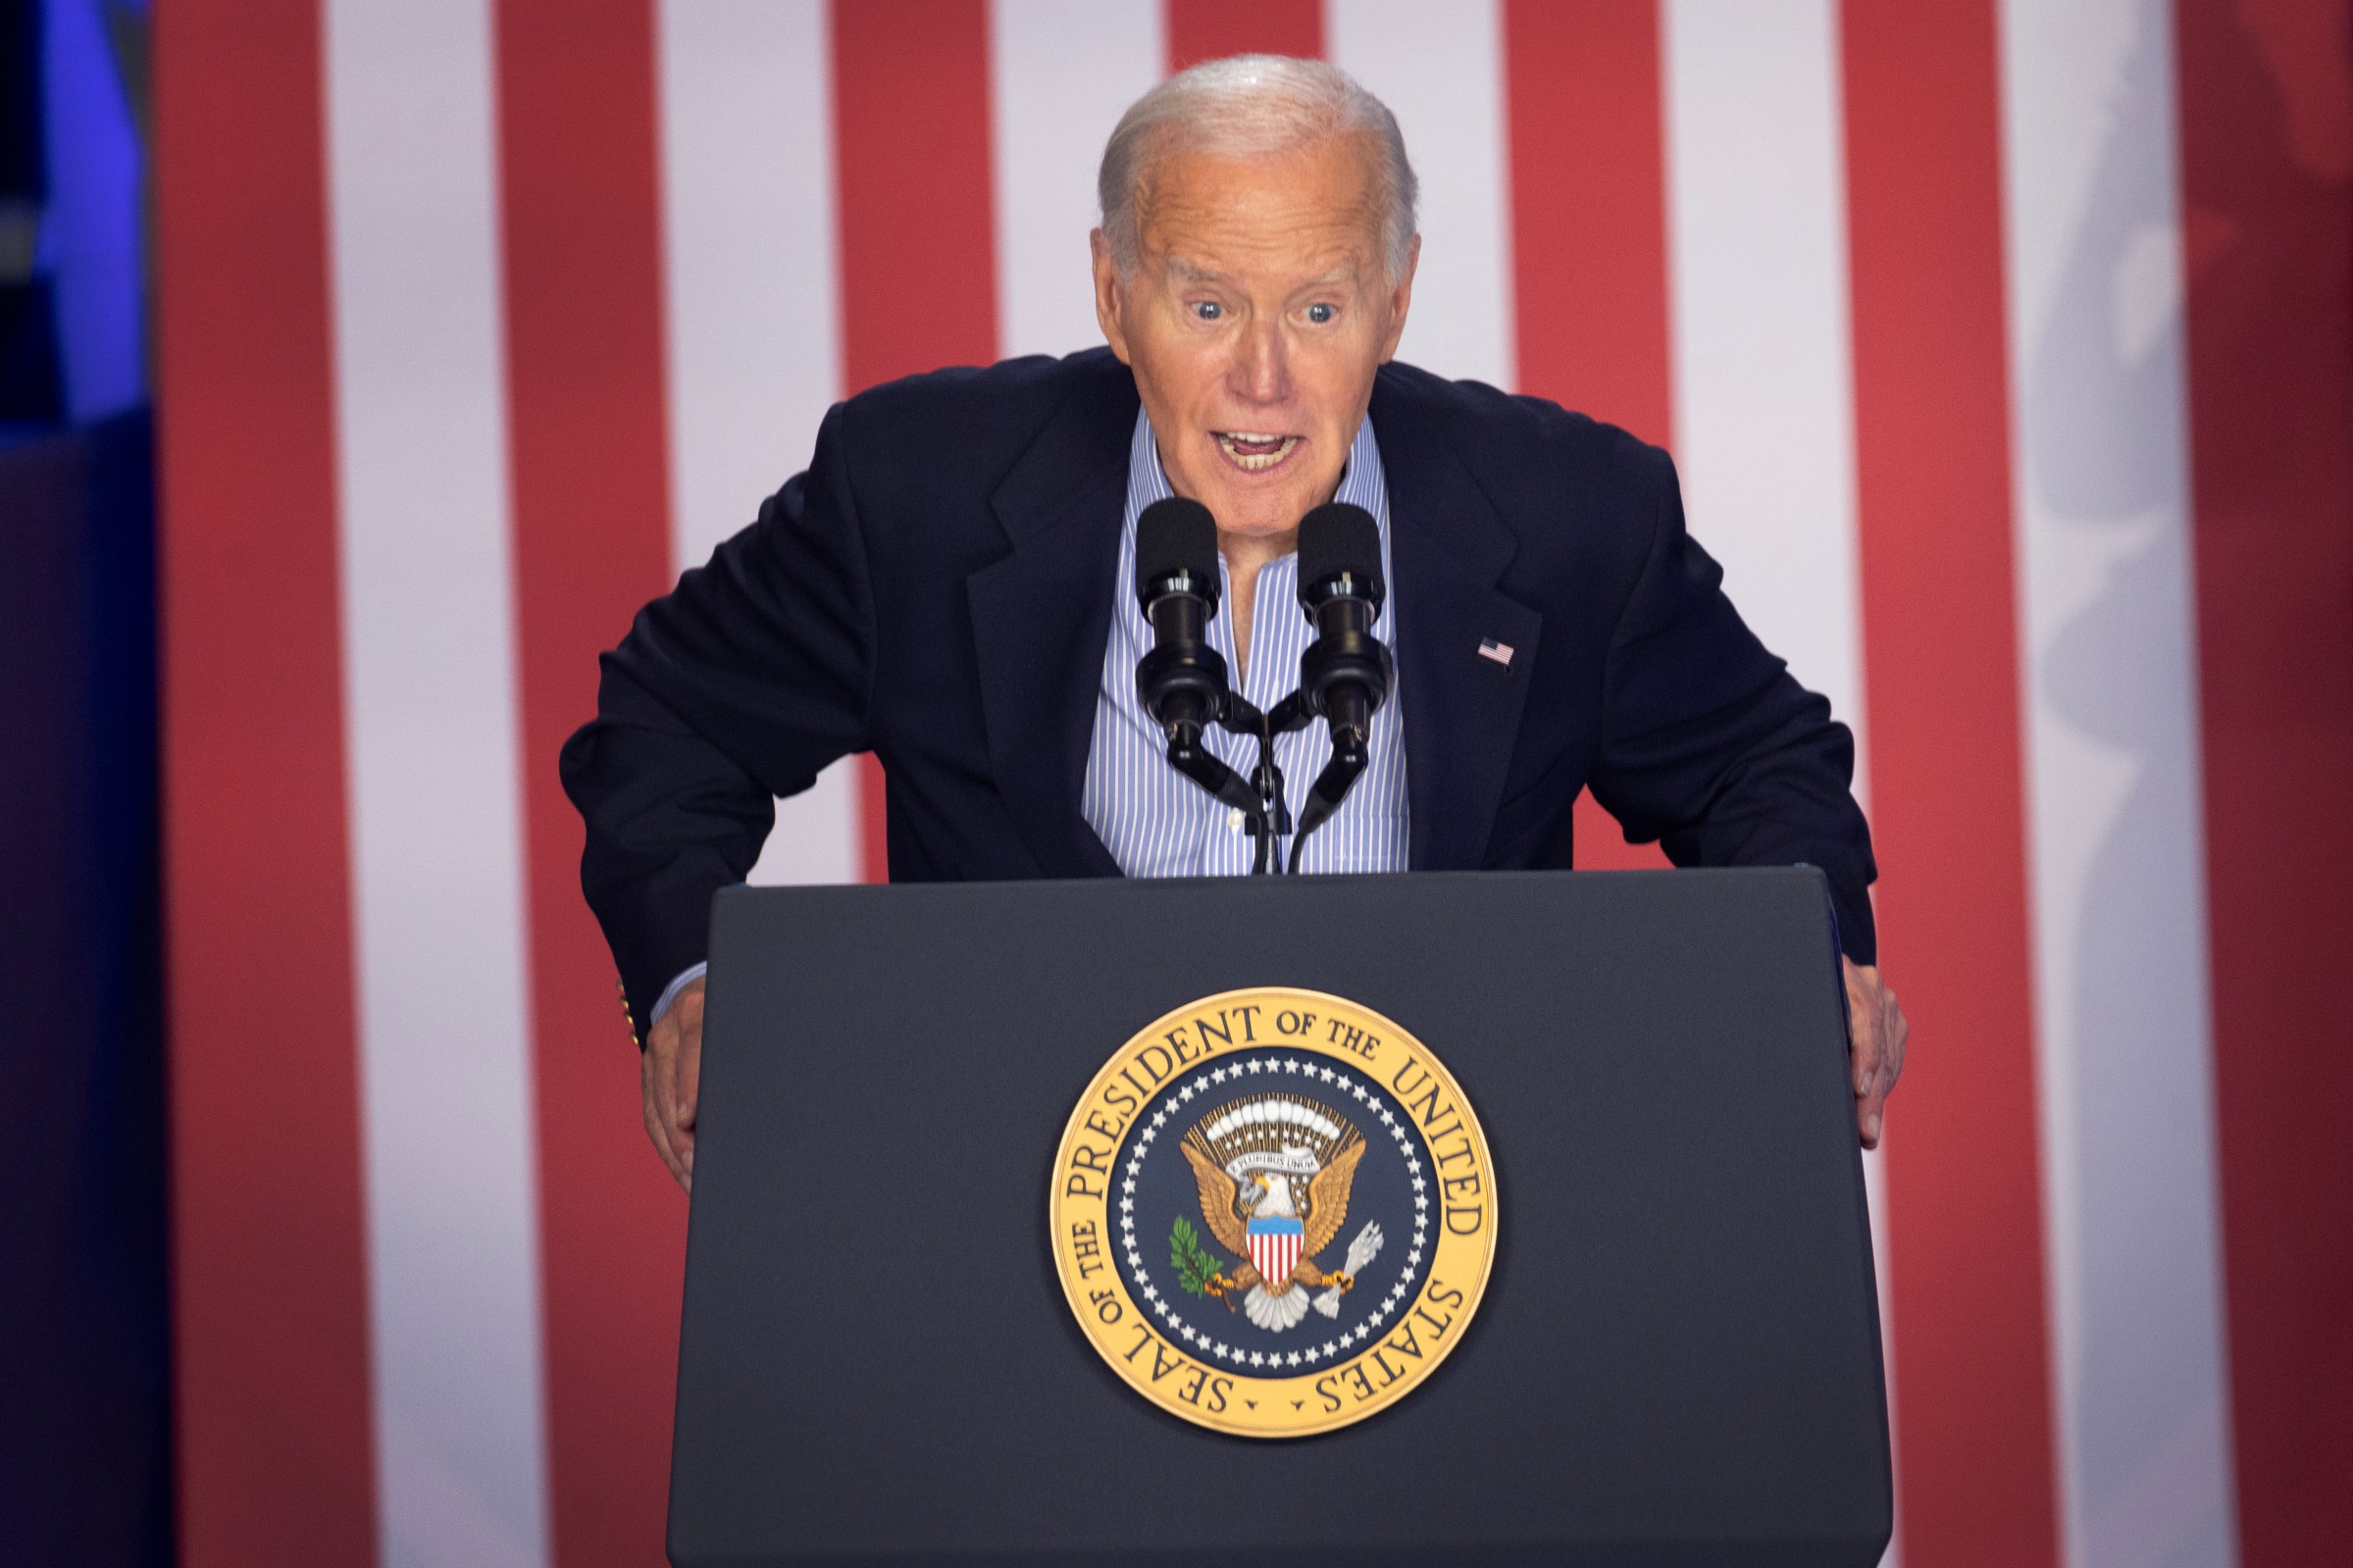 Is it undemocratic to replace Biden on the ticket?